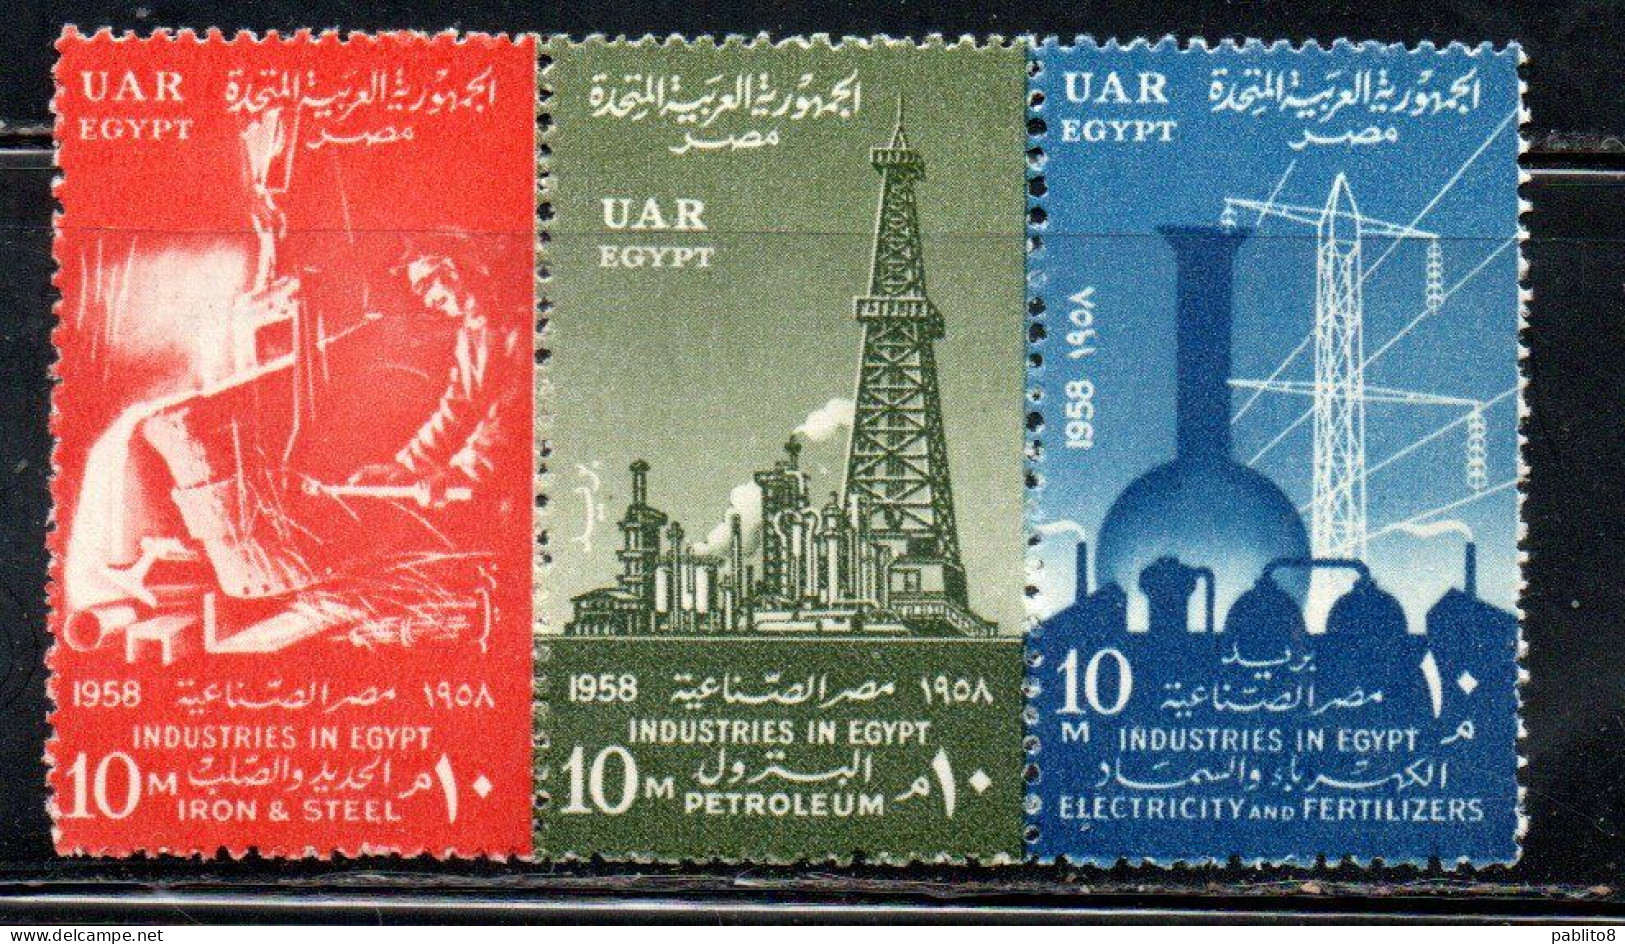 UAR EGYPT EGITTO 1958 INDUSTRIES IRON & STEEL + PETROLEUM OIL + ELECTRICITY AND FERTILIZERS INDUSTRY 10m  MNH - Unused Stamps